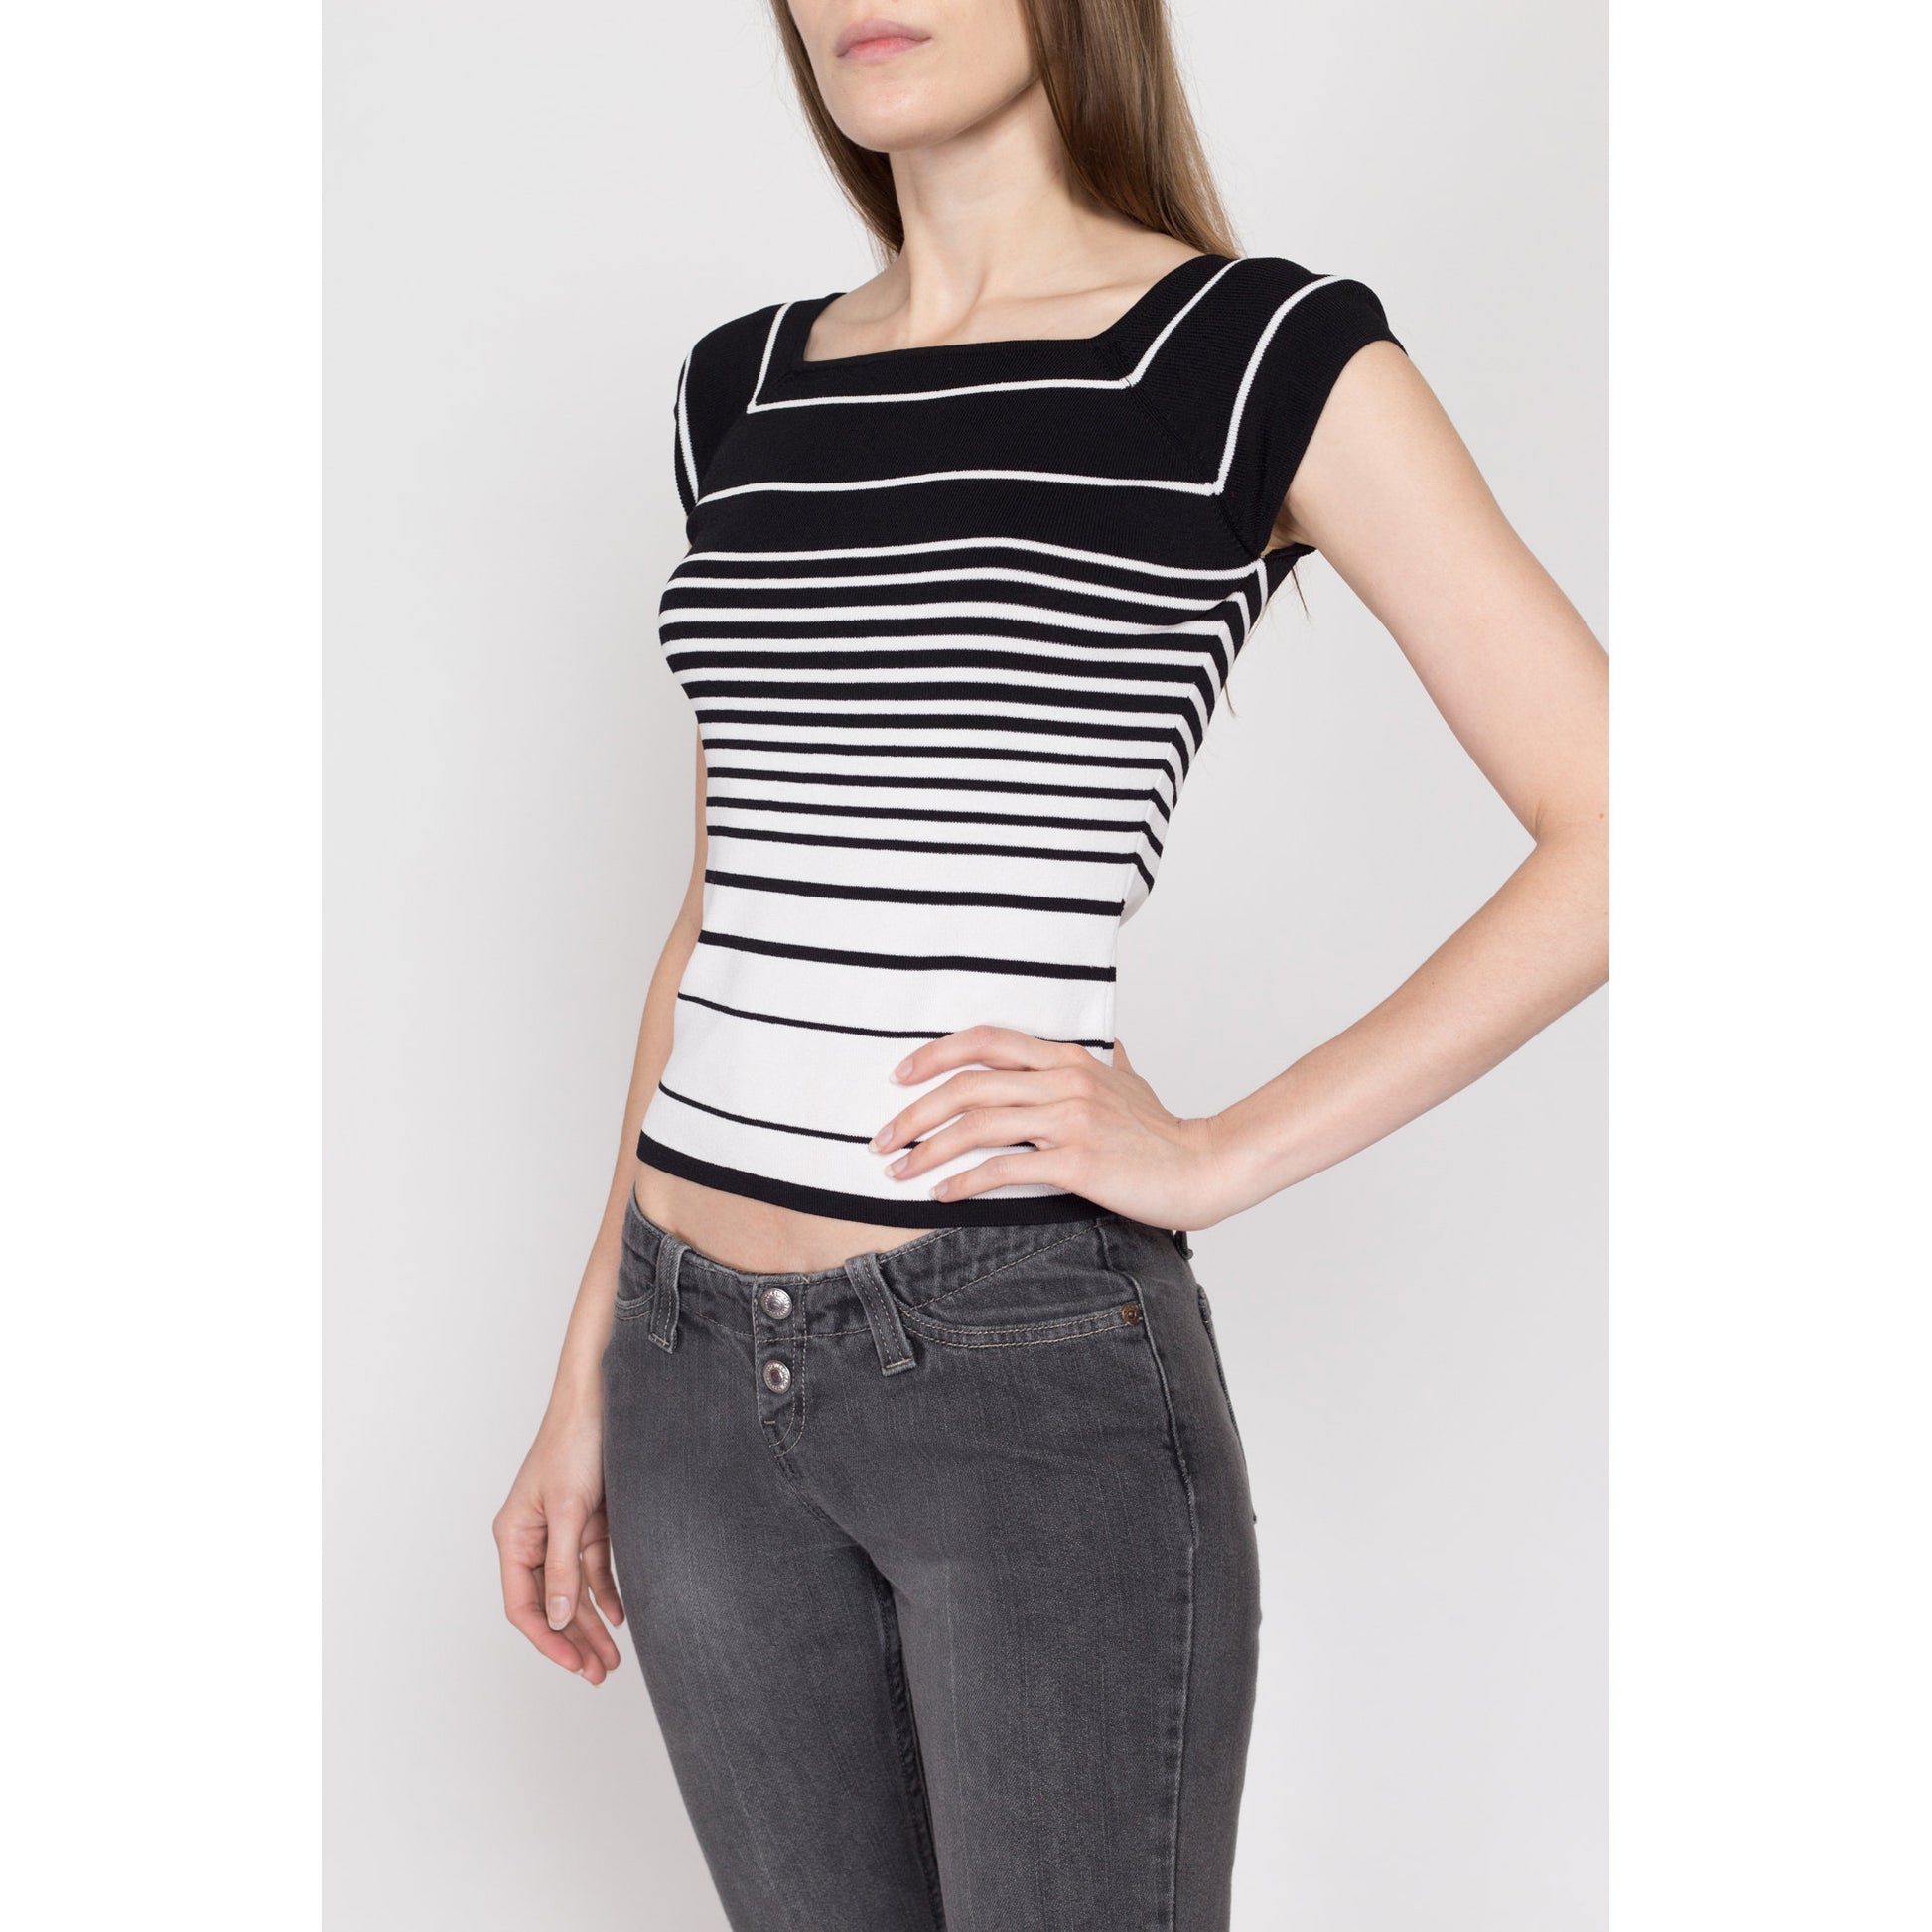 Small Y2K Black & White Gradient Striped Knit Top | Vintage Cap Sleeve Square Neck Fitted Shirt